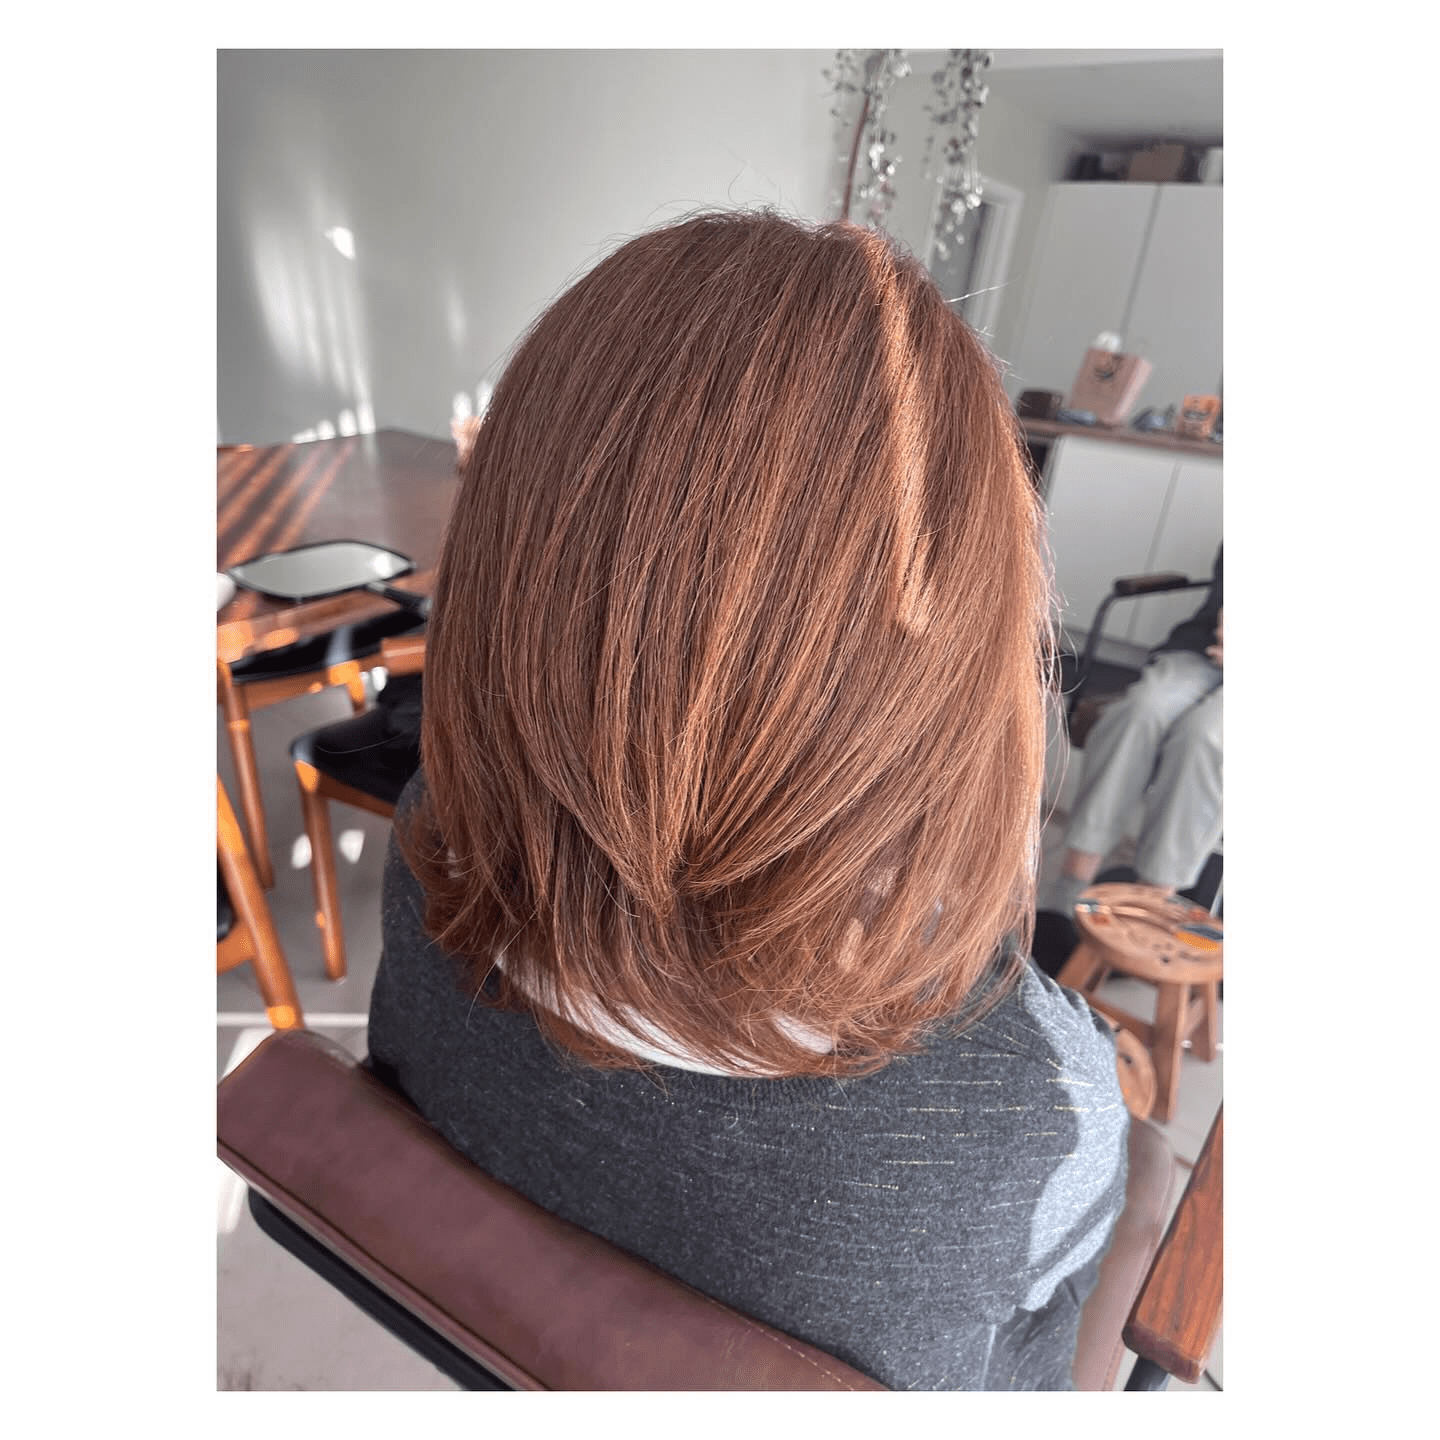 Rounded Shape and Rich Reddish-Brown Color 